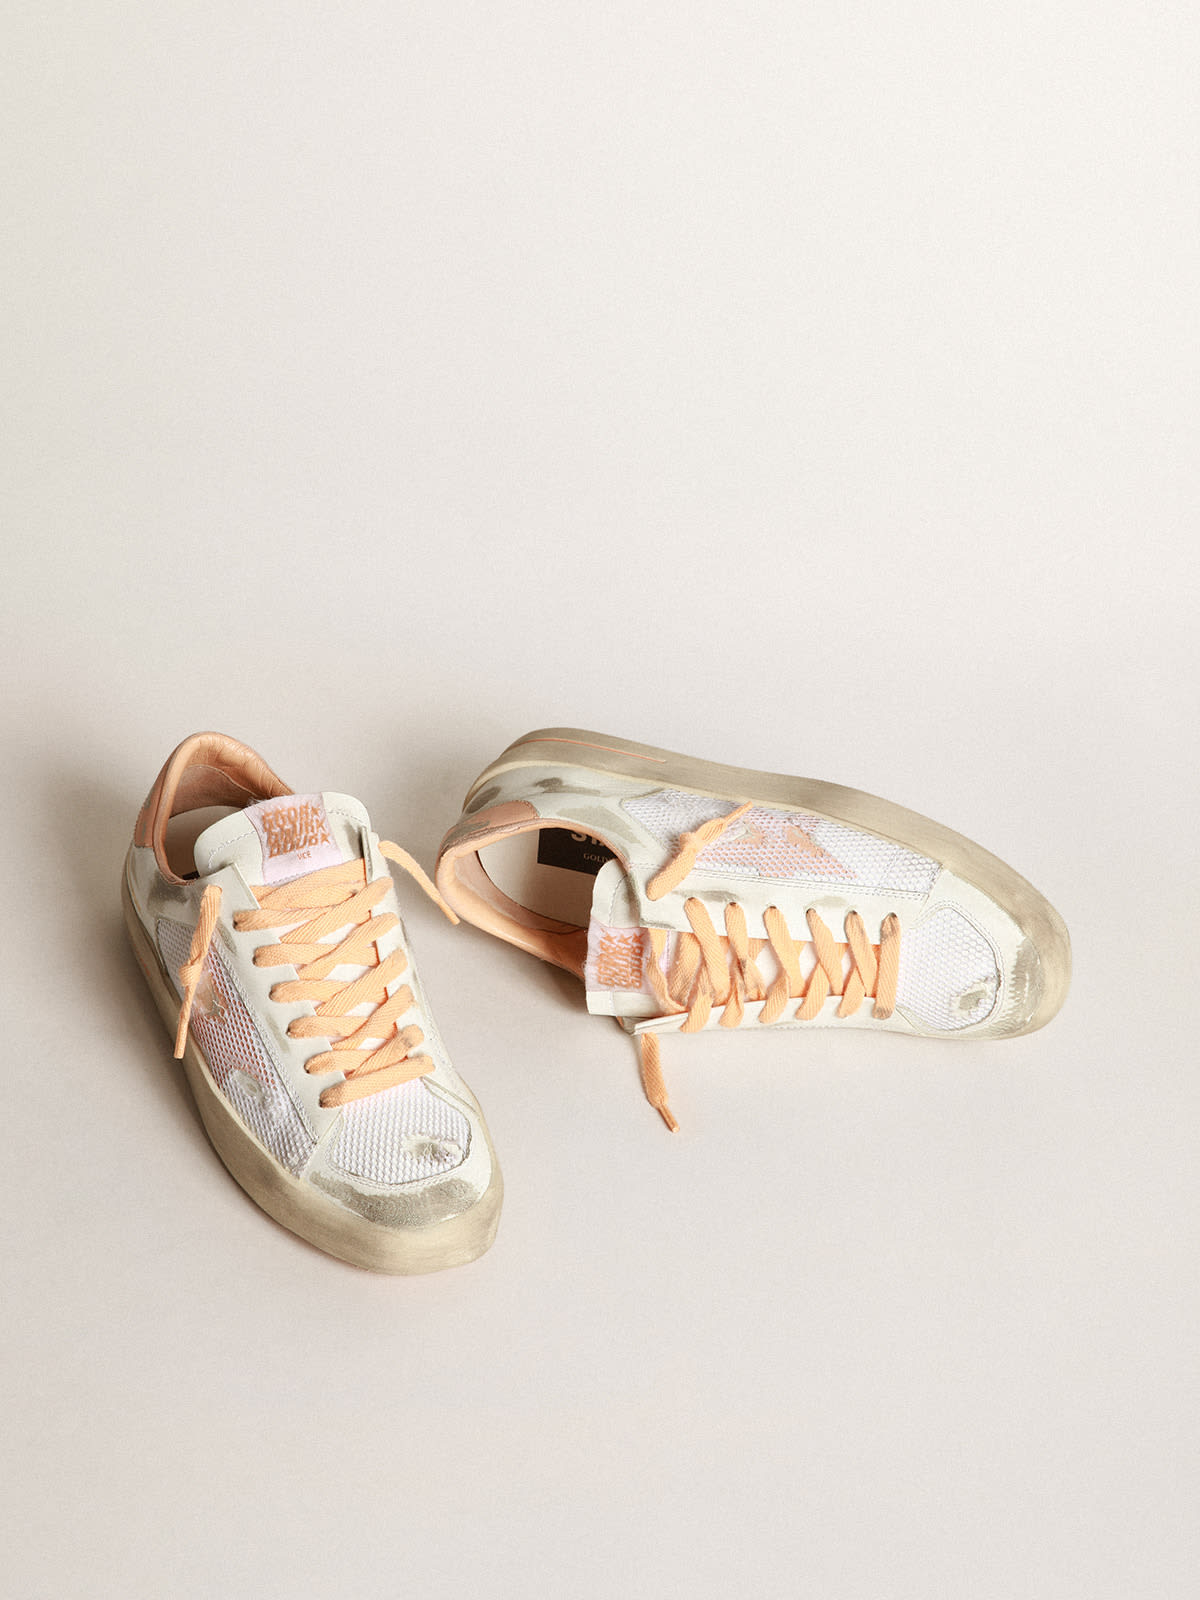 Golden Goose - Stardan sneakers in white leather and mesh with peach-pink leather star and heel tab in 